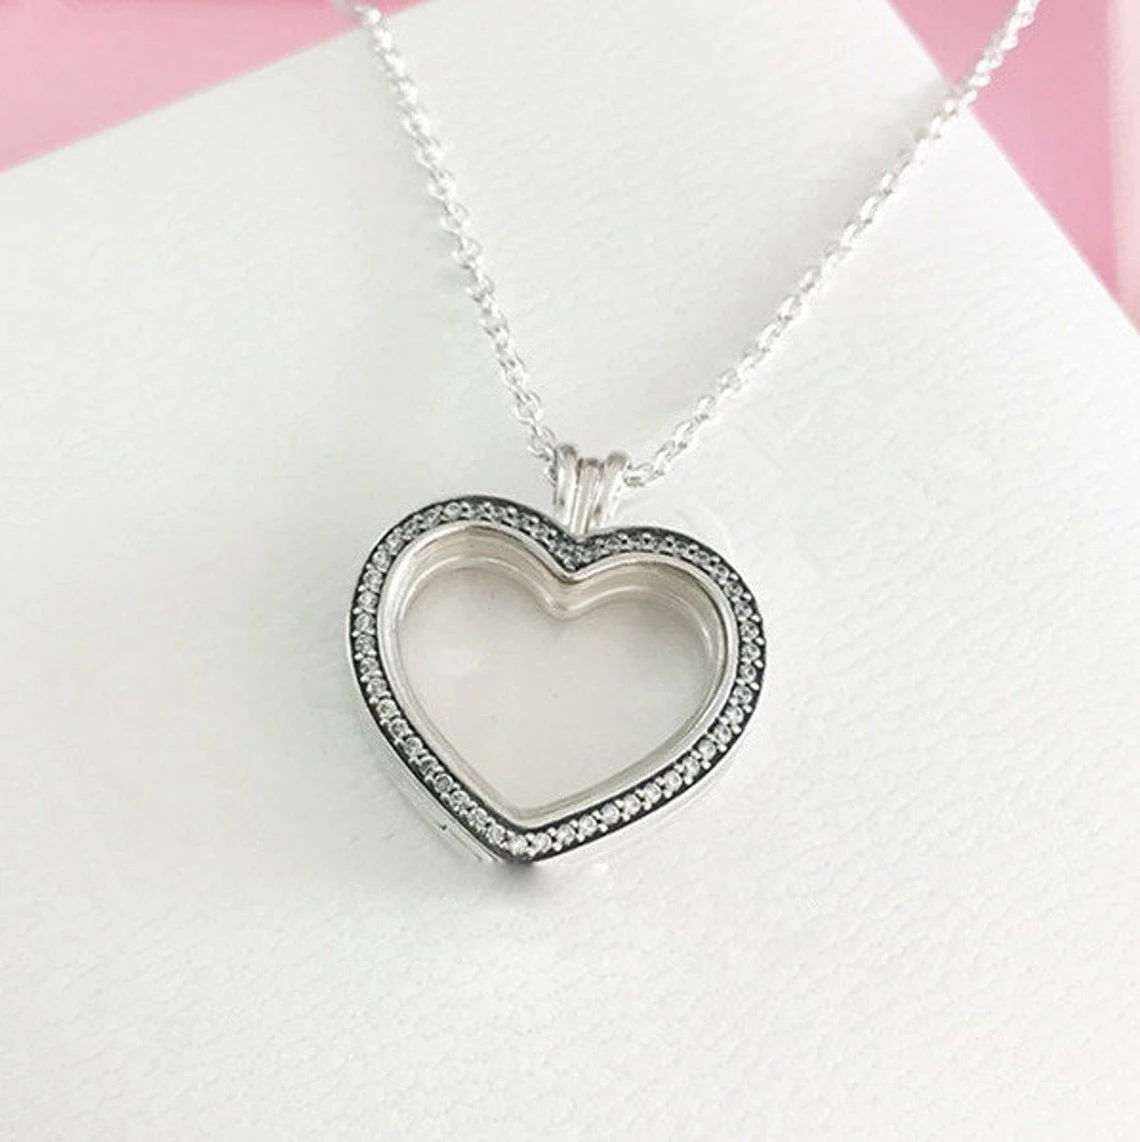 director explorar Rocío 925 Sterling Silver Link Chain Sparkling Floating Heart Locket Pendant  Necklace Fit Woman European Pandora Style Jewelry|Pendant Necklaces| -  AliExpress